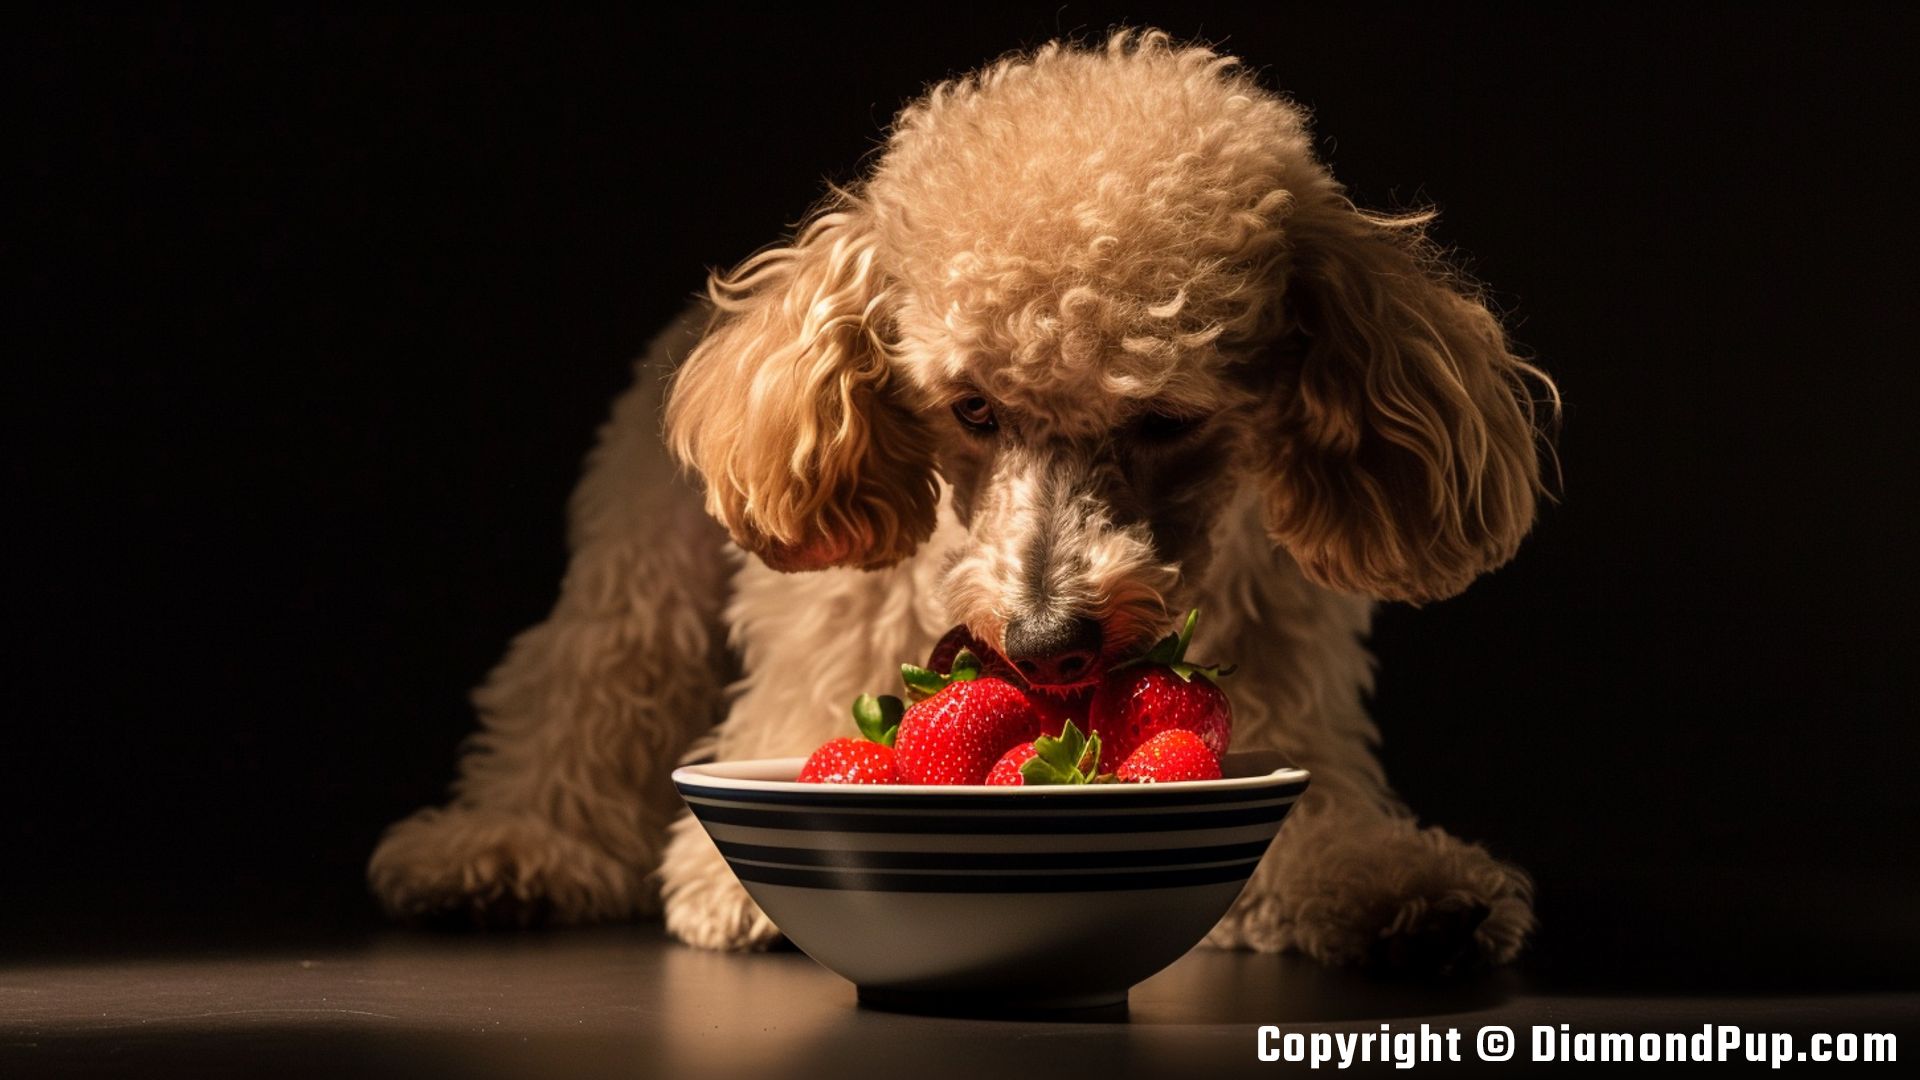 Picture of a Playful Poodle Snacking on Strawberries